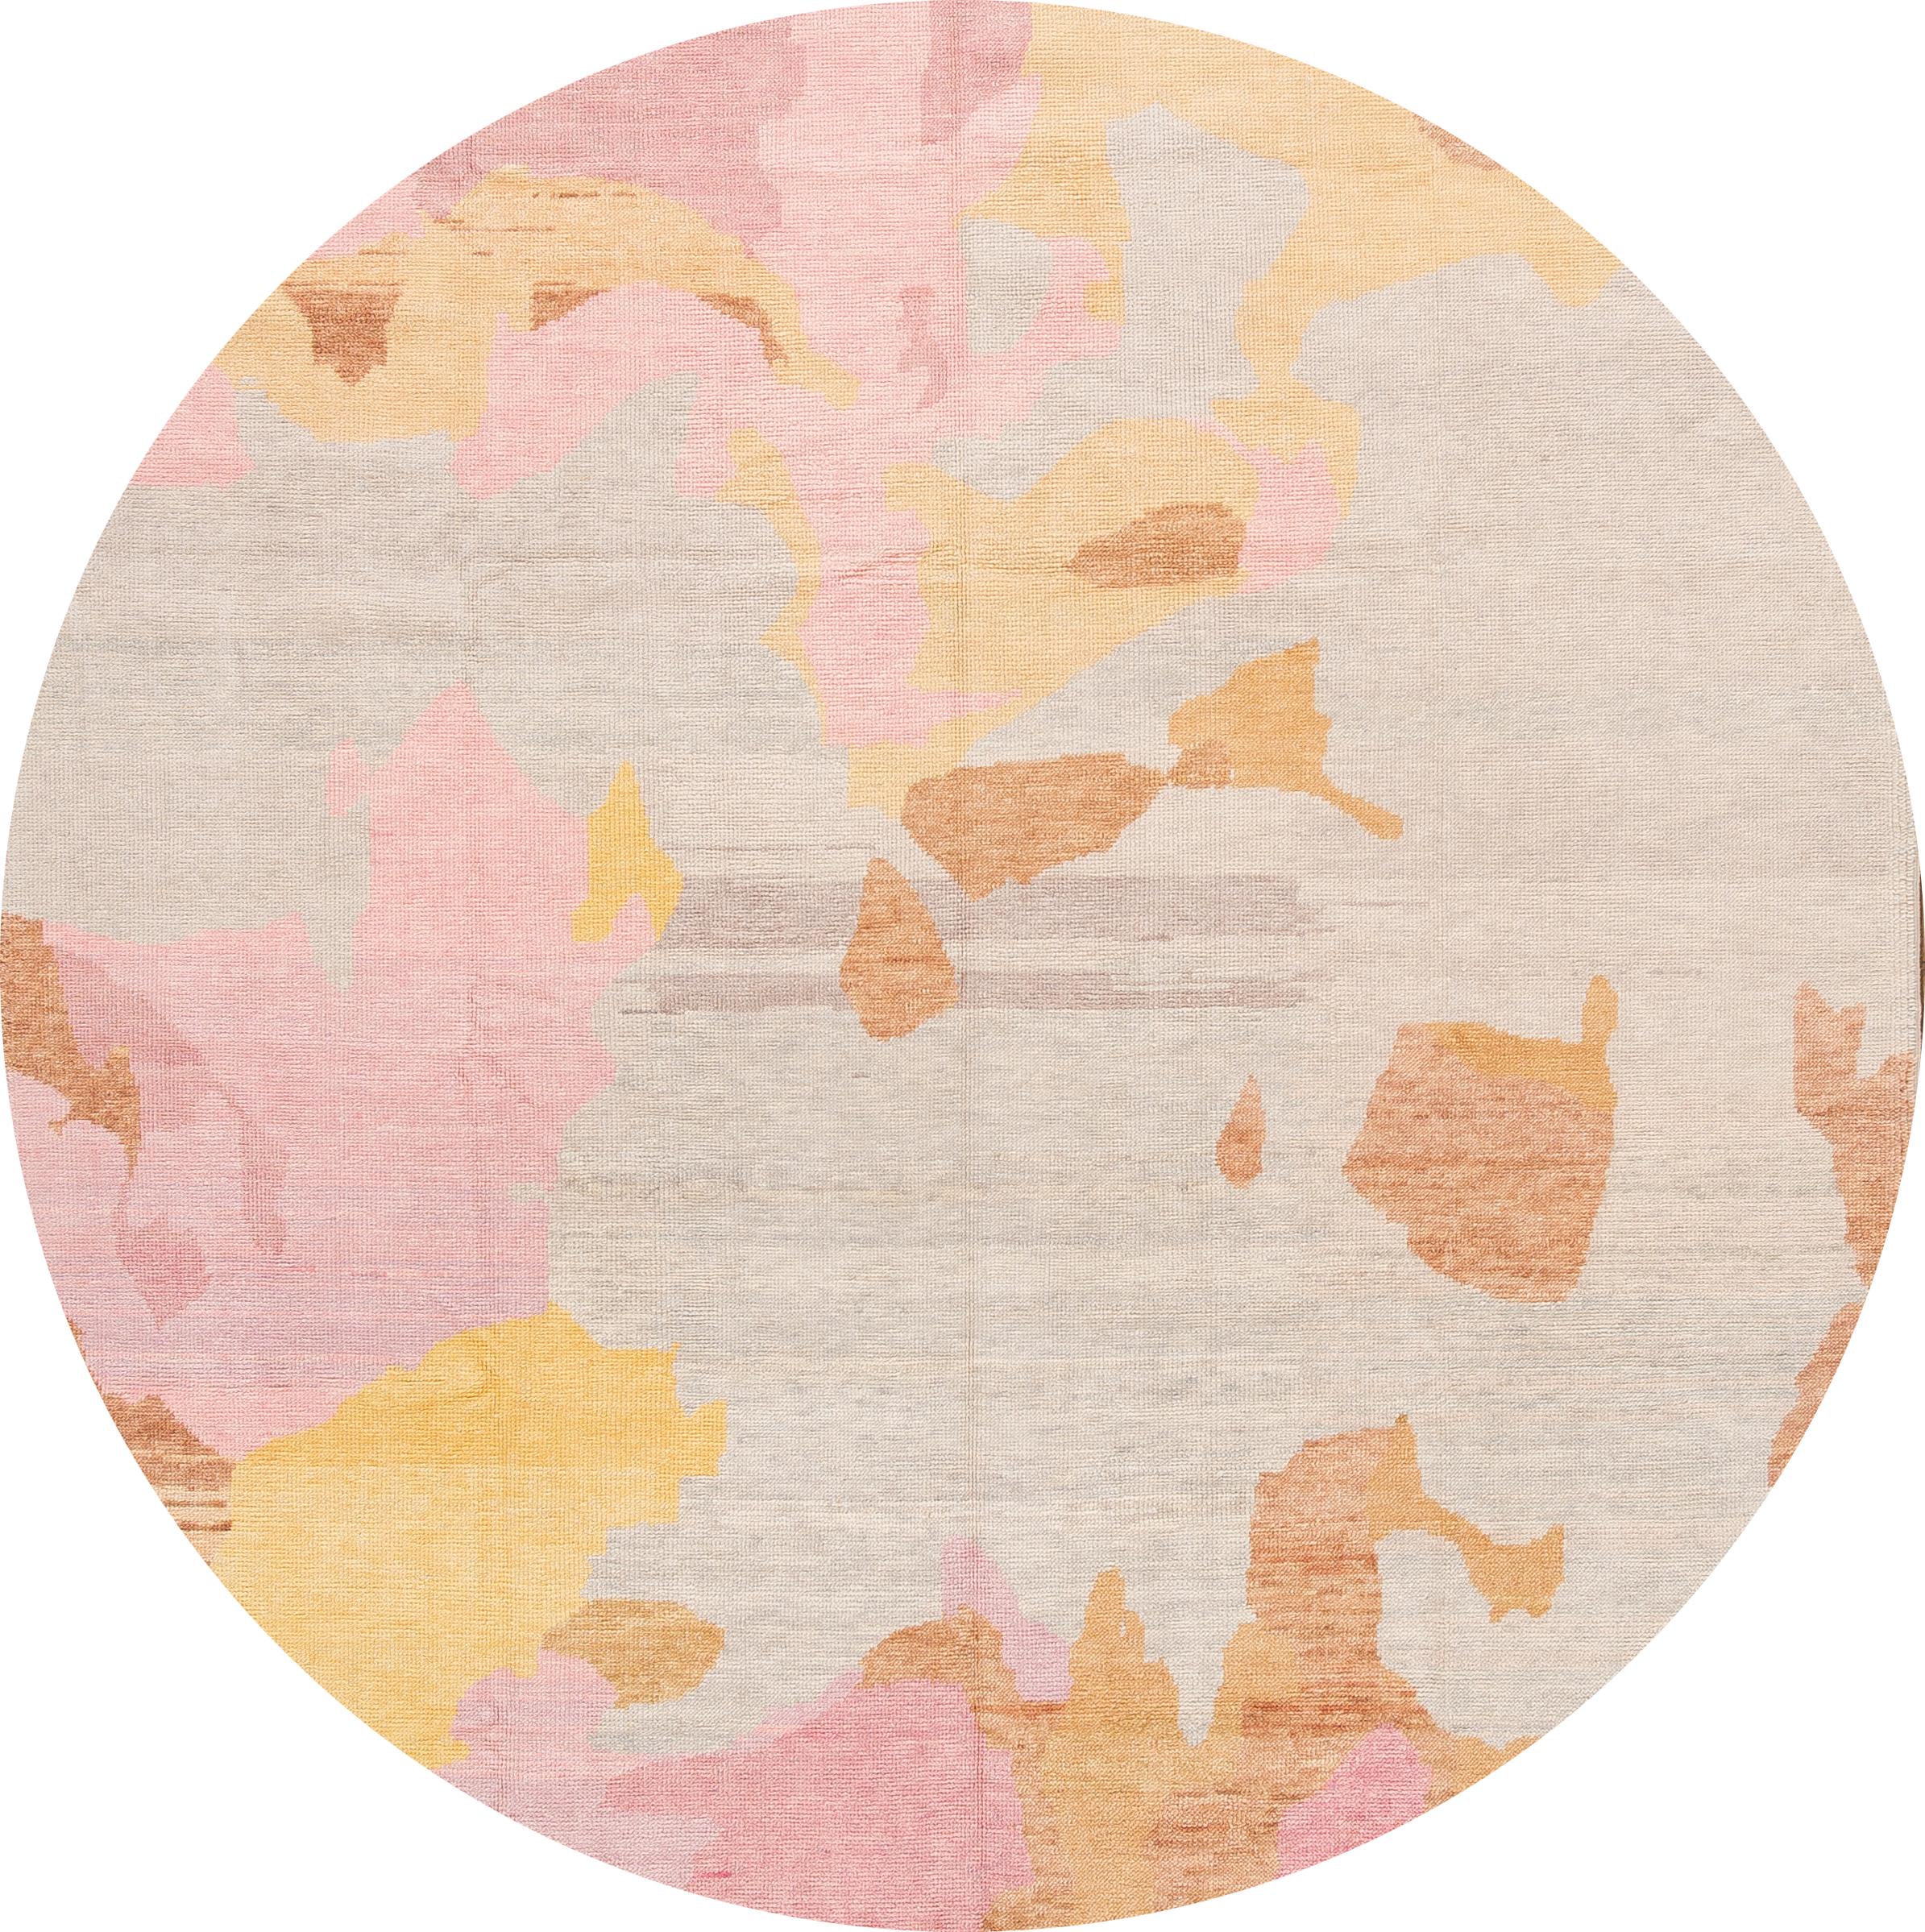 Beautiful contemporary Turkish designer rug, hand knotted wool with a tan field. Accents of pink, brown, and yellow in all-over abstract design,

This rug measures: 8'1” x 9'10”.